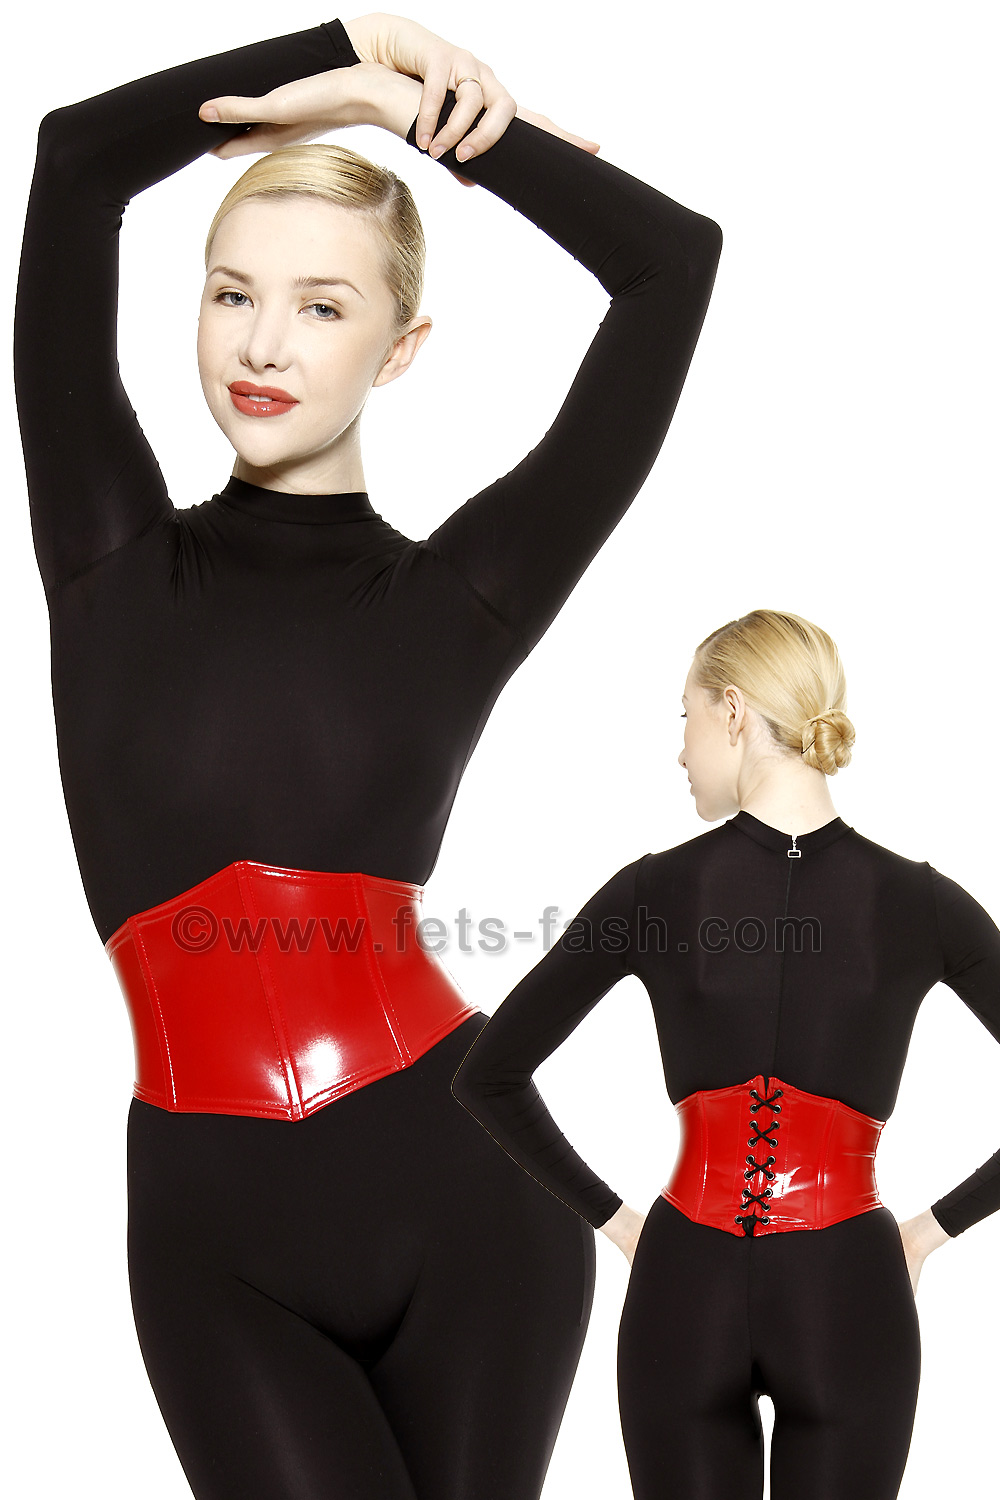 Waist Corset into Stretchlack Material